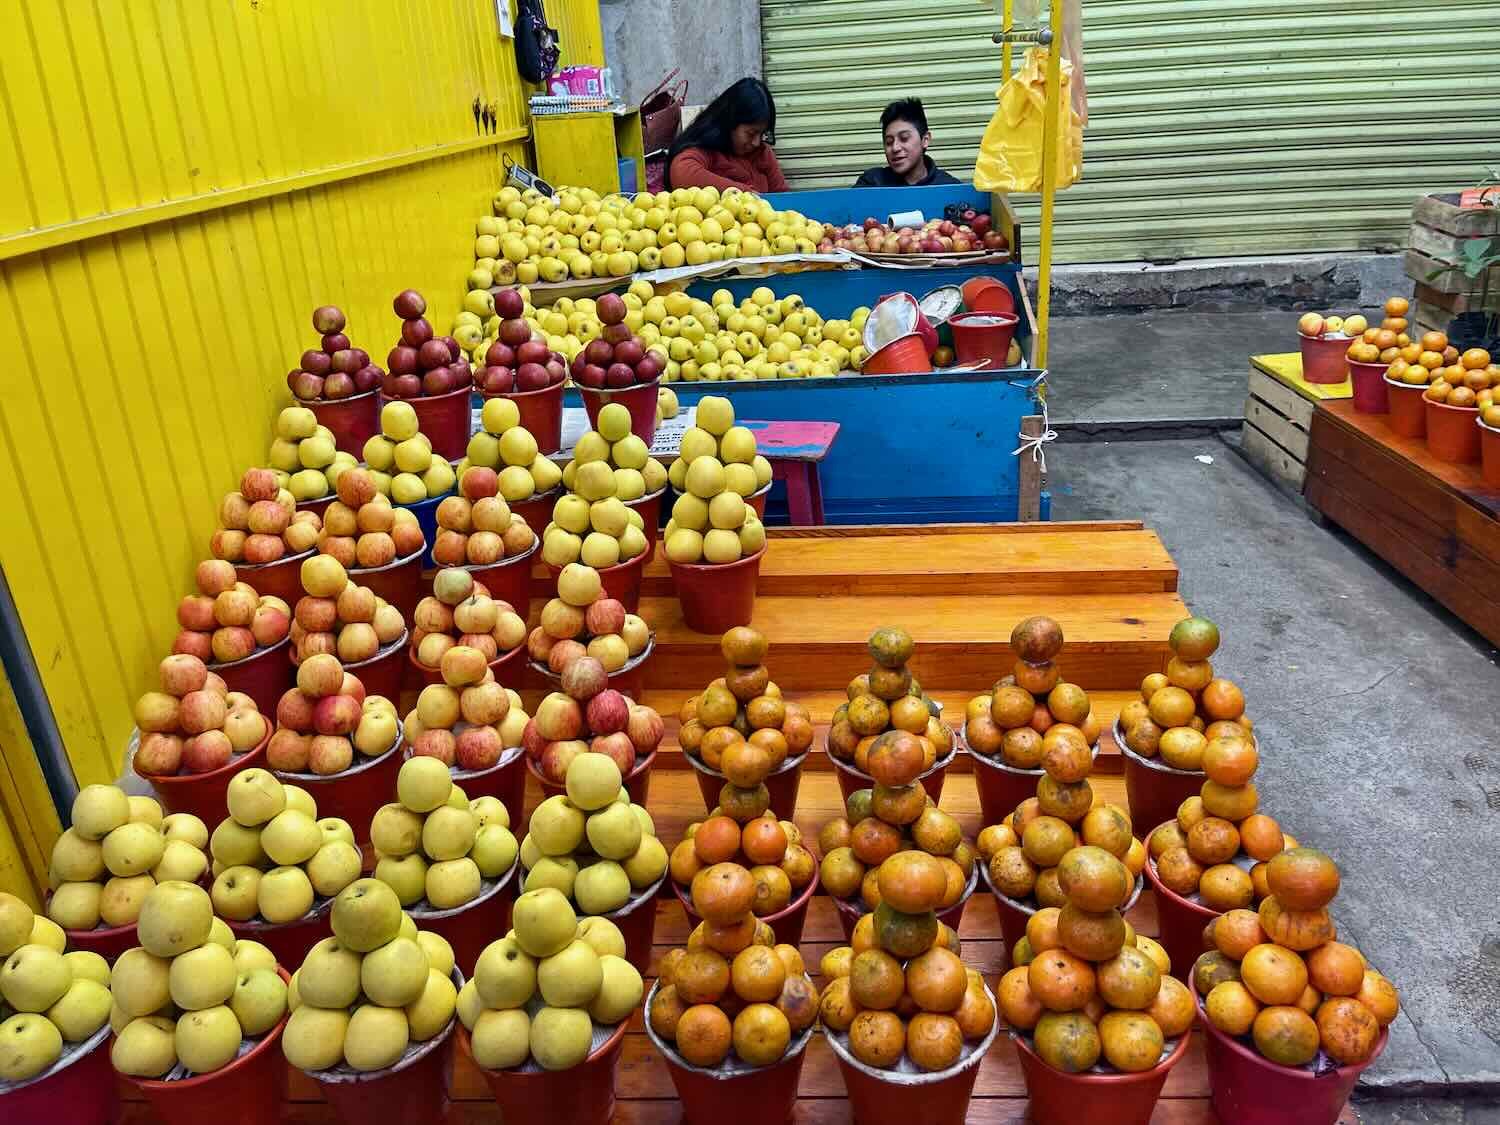 Meticulously stacked fruits